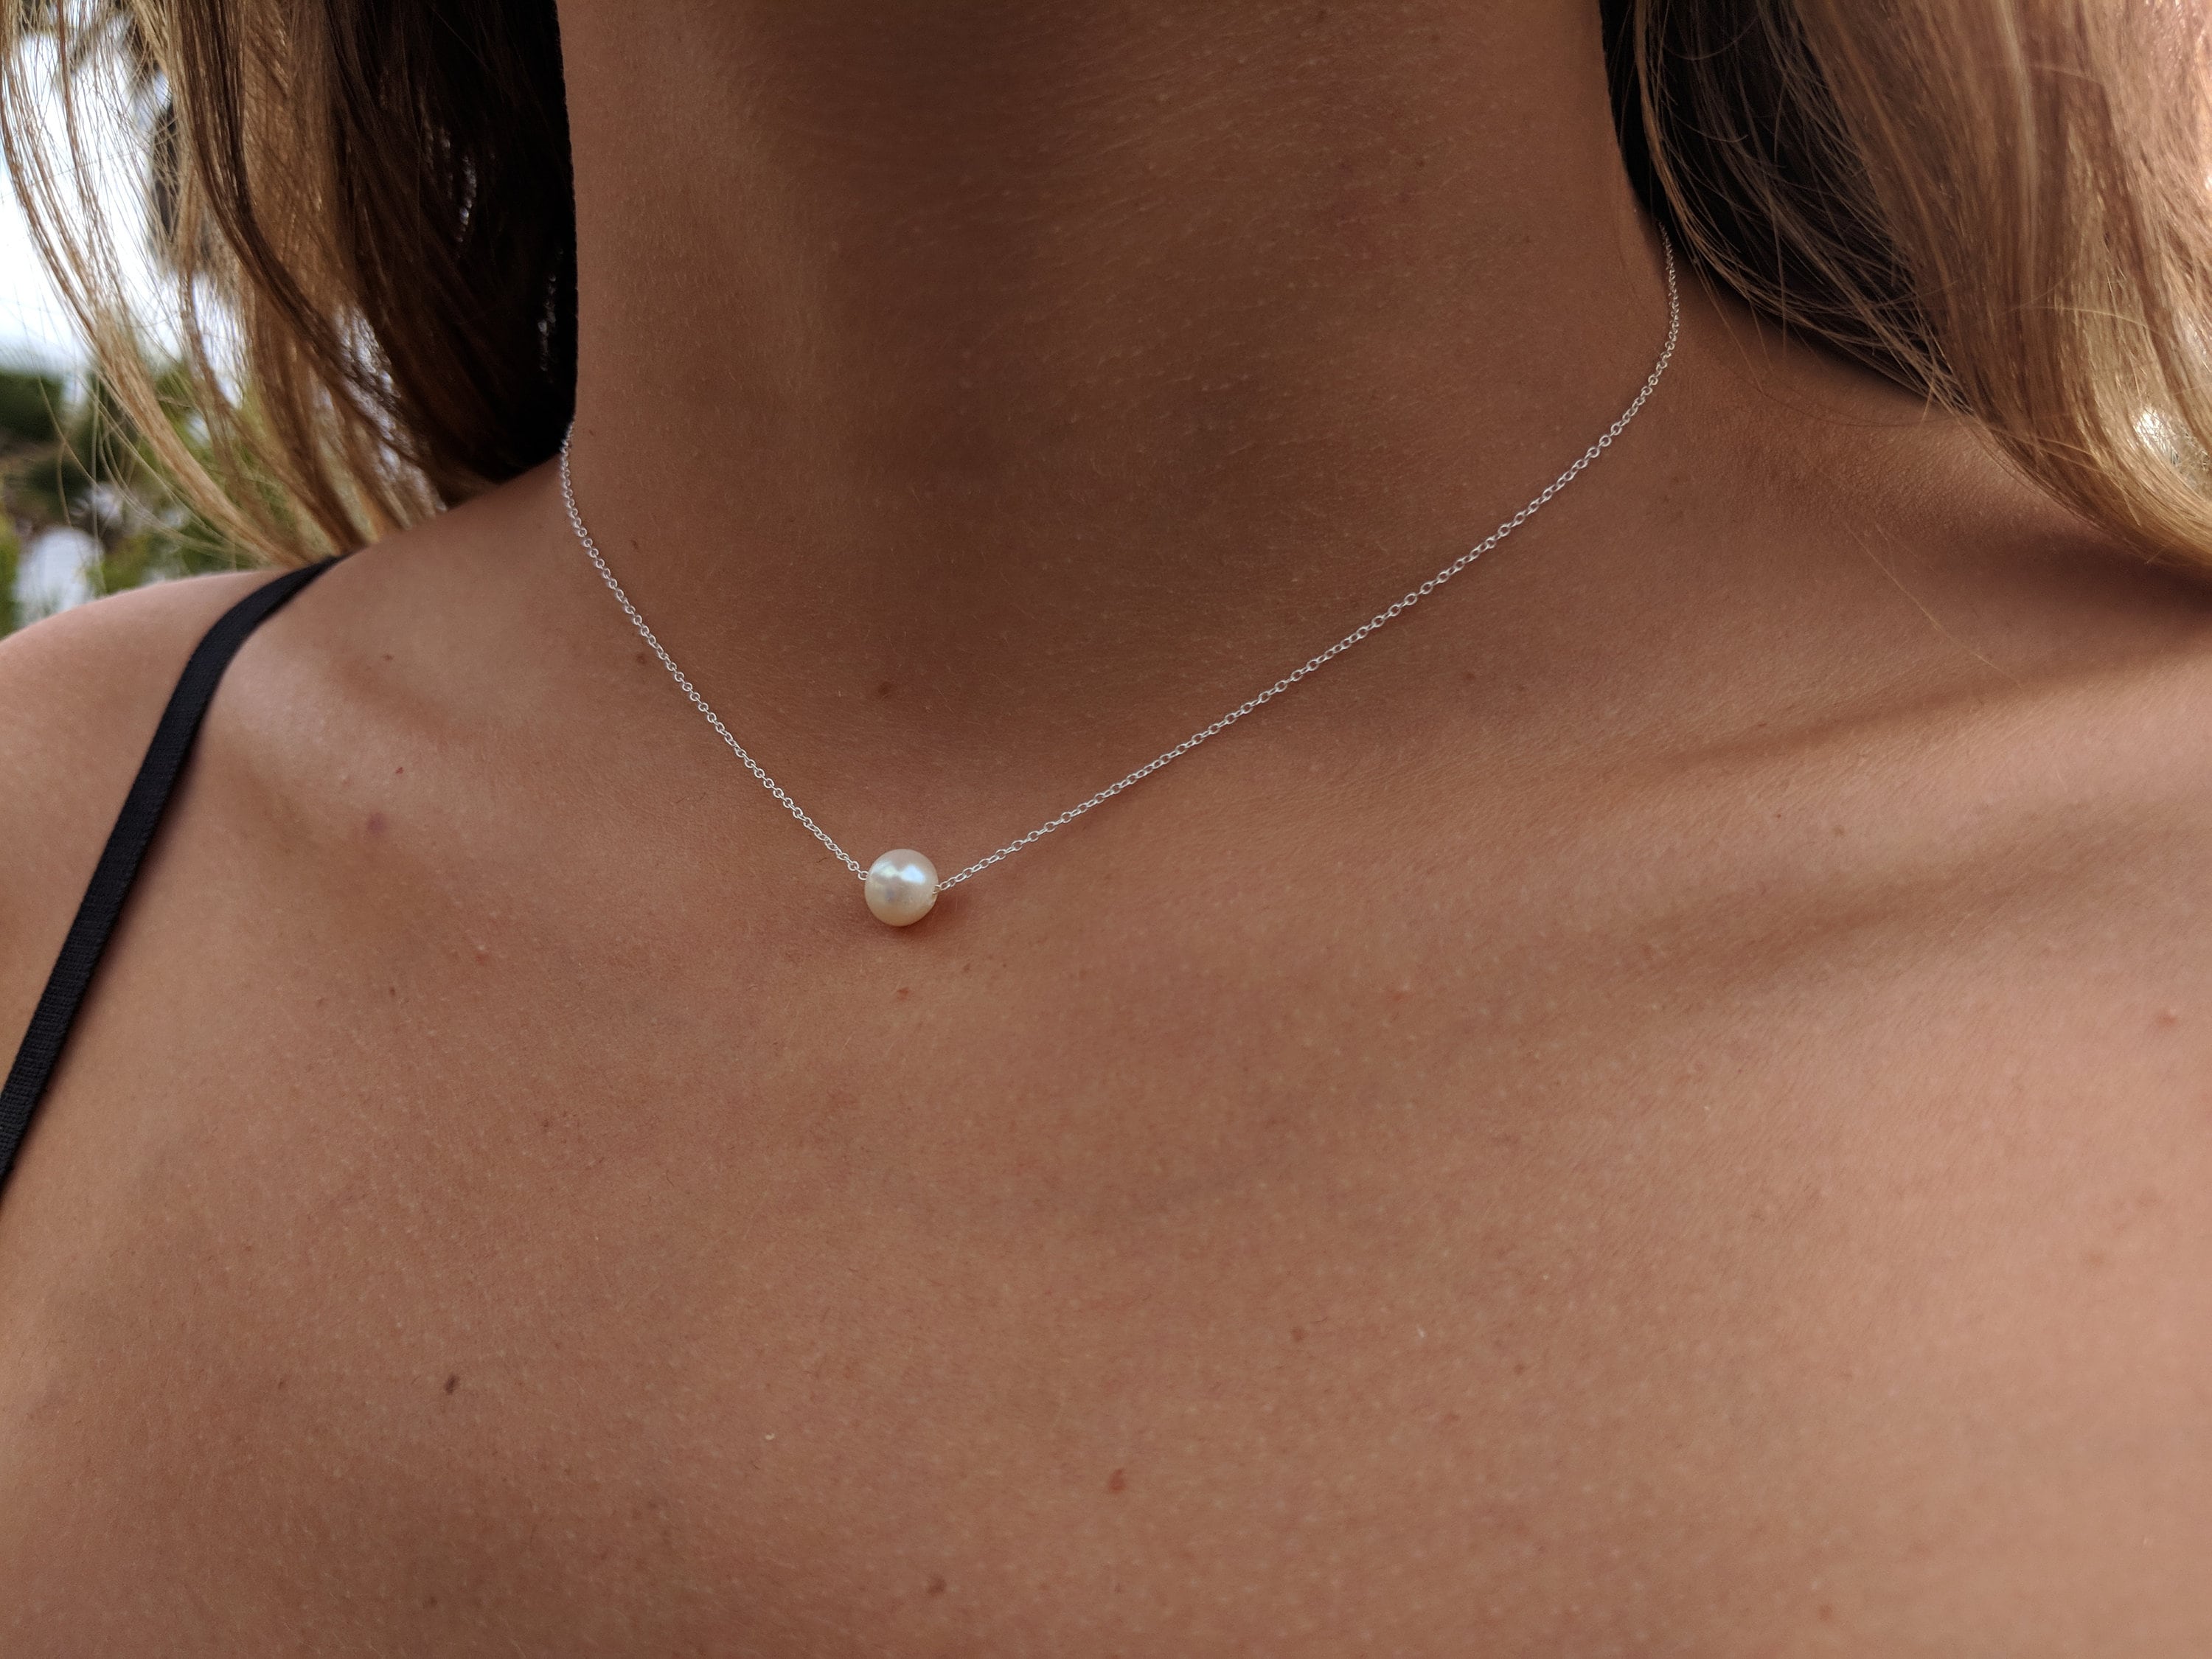 Single Floating Pearl Illusion Choker Necklace Dainty Necklaces for women 41i